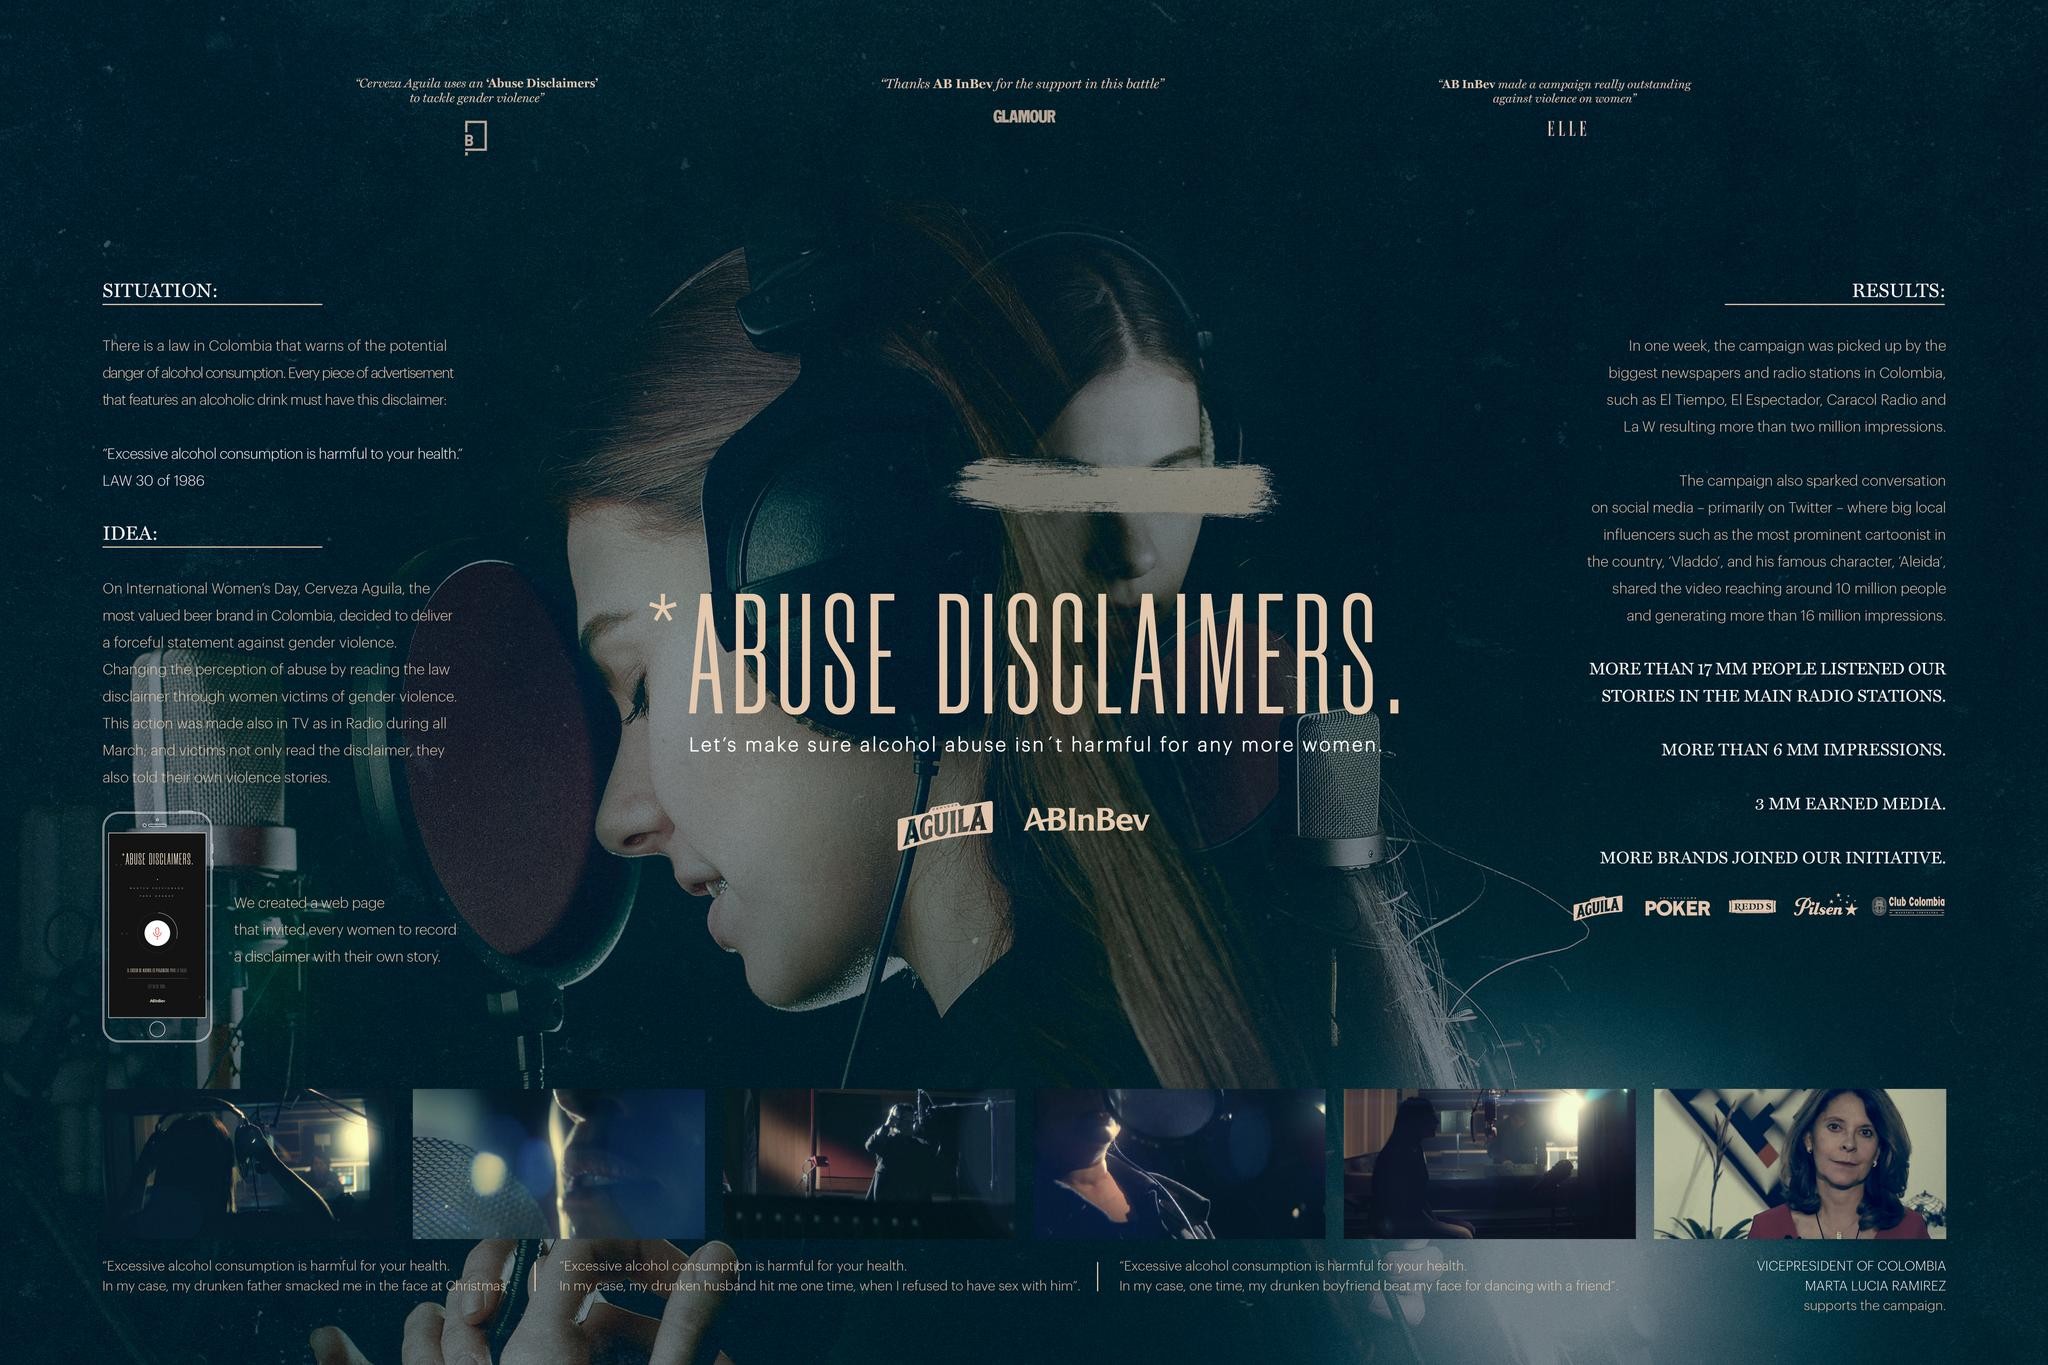 ABUSE DISCLAIMERS